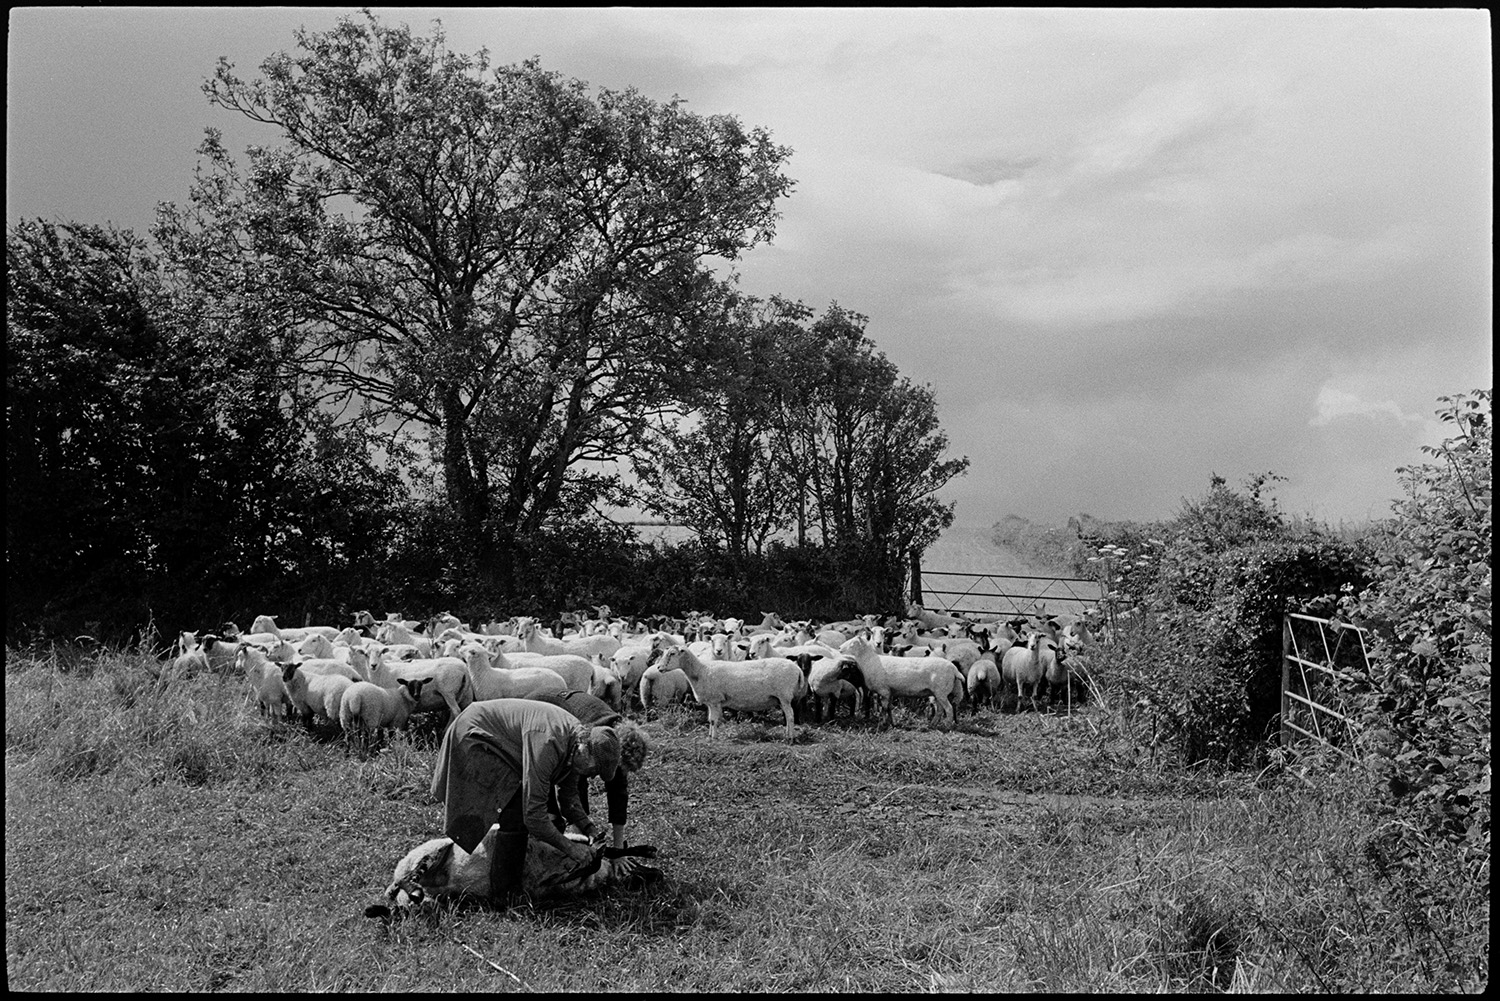 Farmers checking sheep and fencing off silage heap. Church with tower behind.
[Mr and Mrs Dunn checking a sheep on the ground in a field at Brimblecombe, Dowland. The rest of the flock can be seen in the background.]